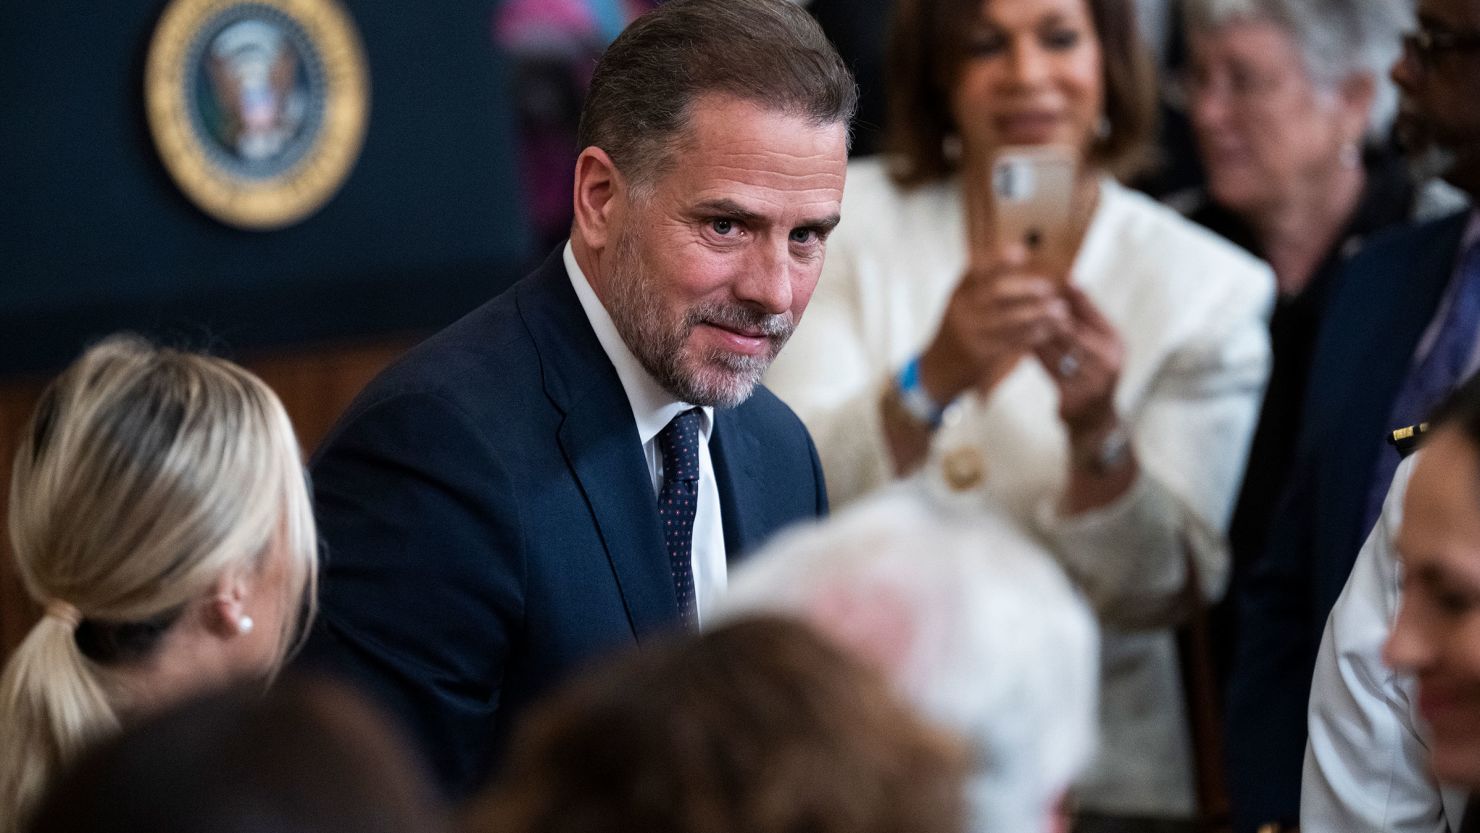 Biden’s Balancing Act: White House Eyes Limiting Hunter Biden’s Public Profile Amid Legal Troubles and Electoral Concerns